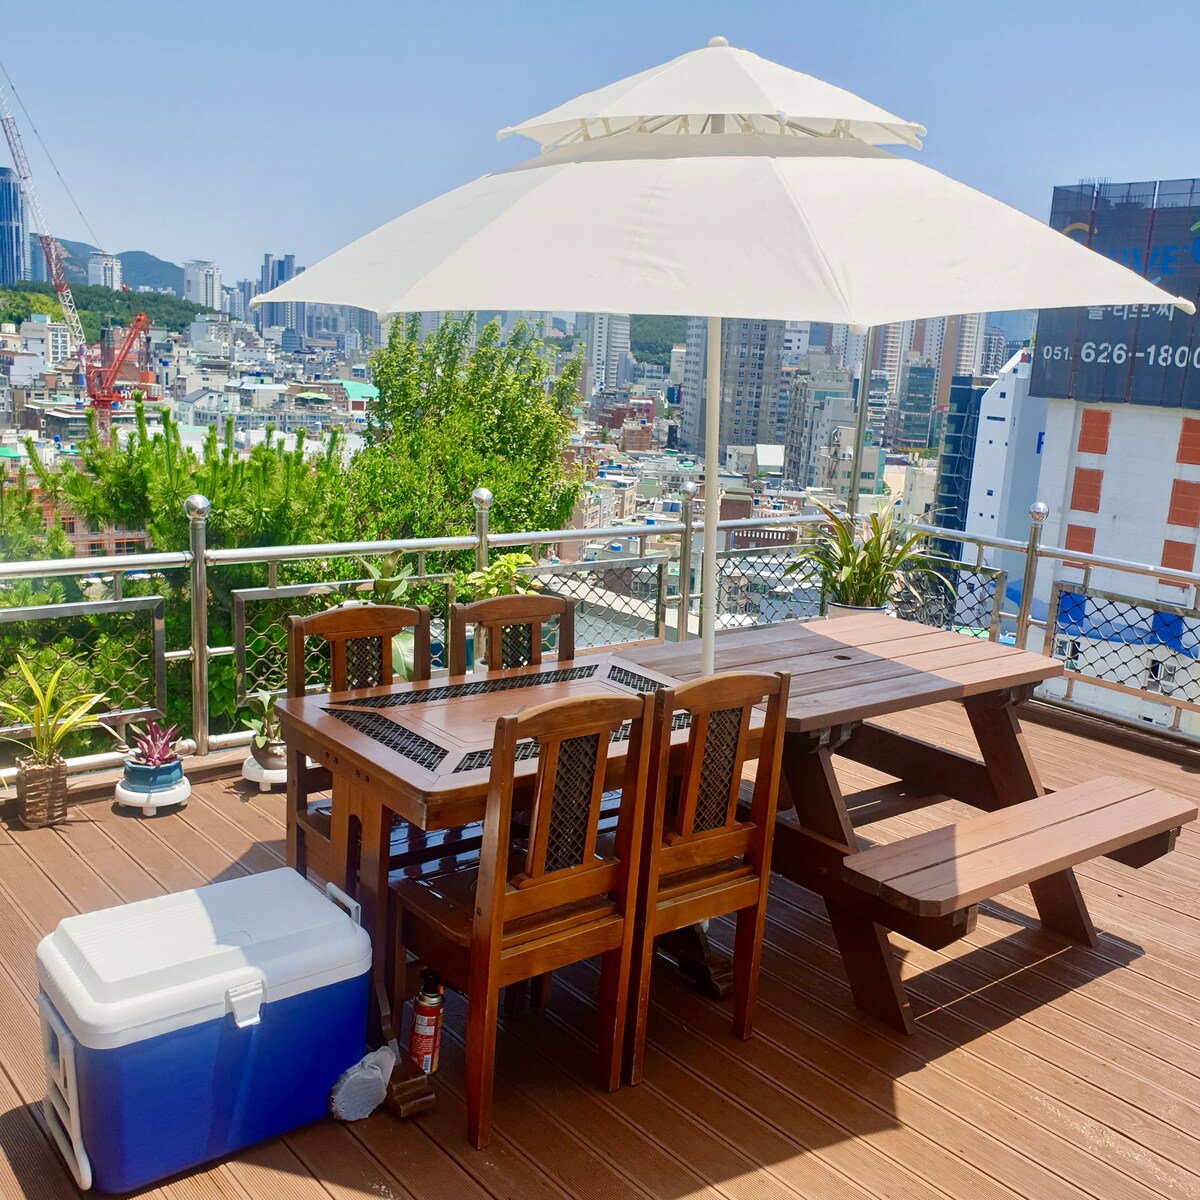 260㎡ Penthouse with private patio! 1 min to beach